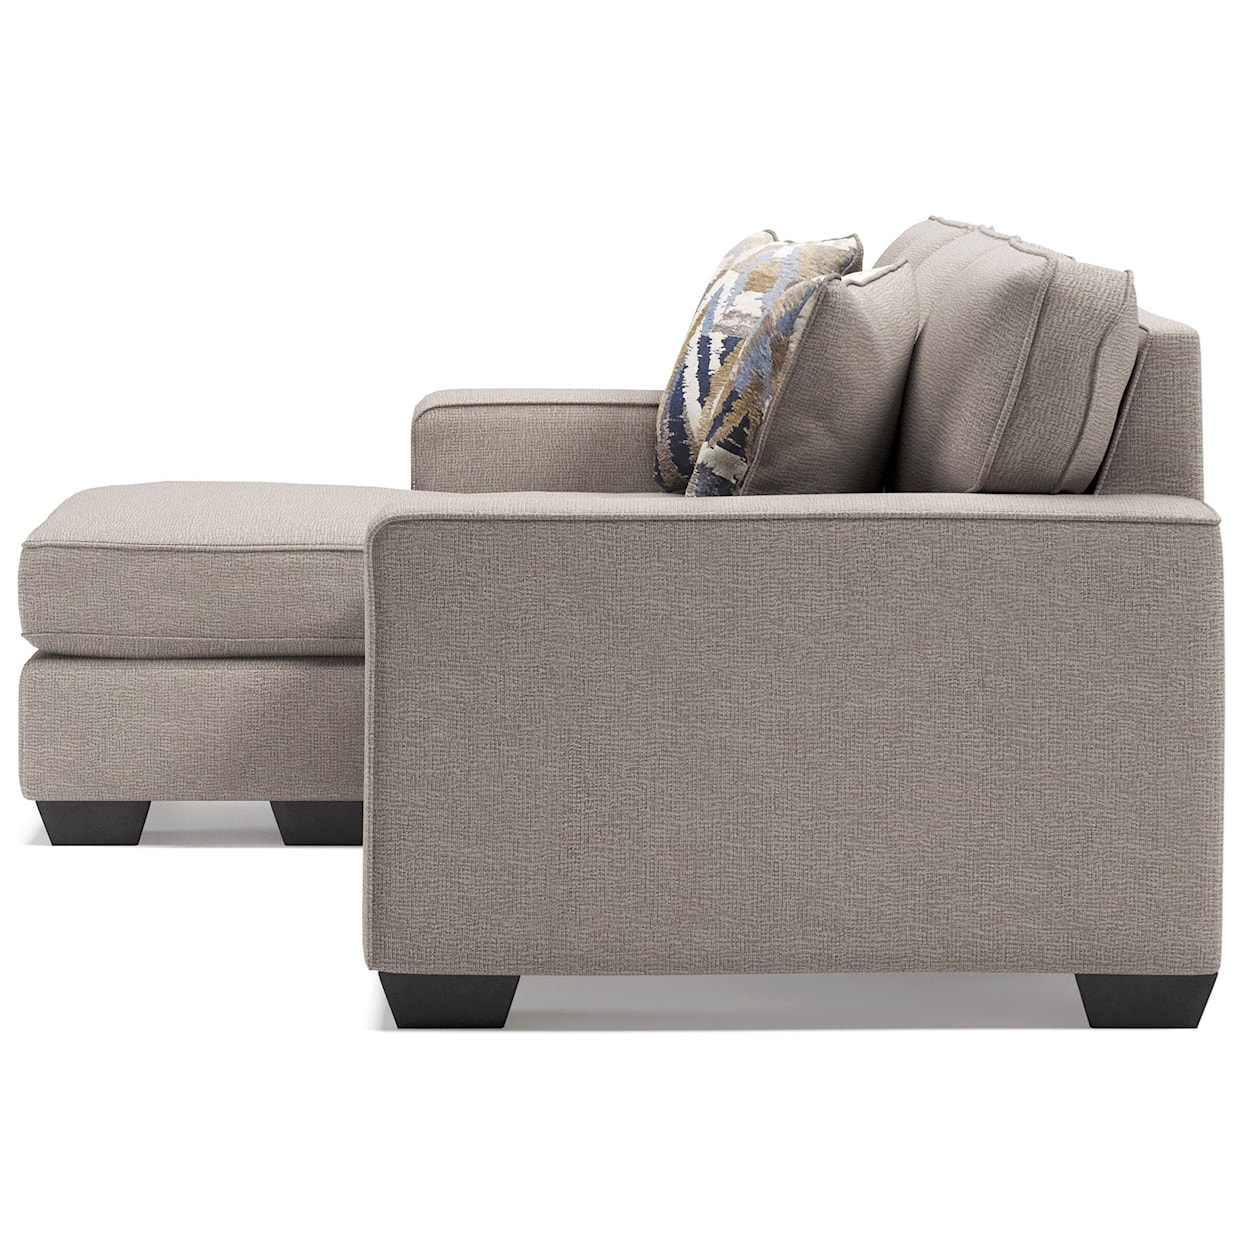 Signature Design by Ashley Greaves Sofa Chaise